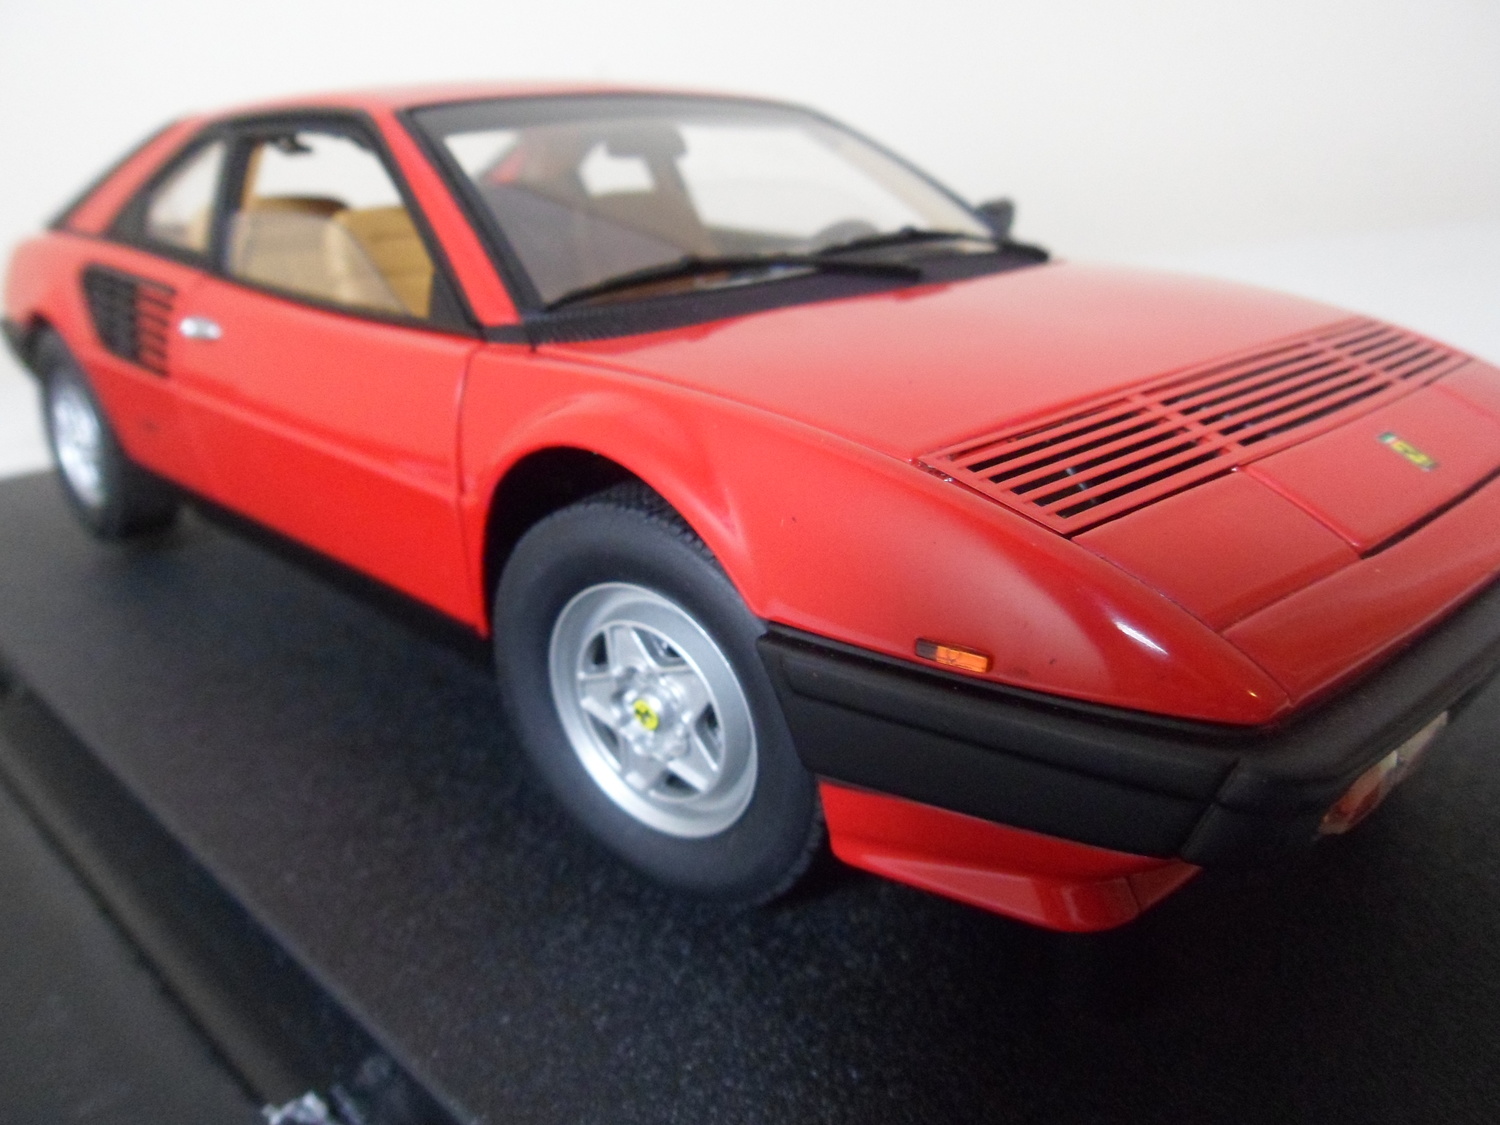 FERRARI MONDIAL 8 COUPE 60TH RELAY VERSION MATTE RED 1:18 by HOT WHEELS ELITE